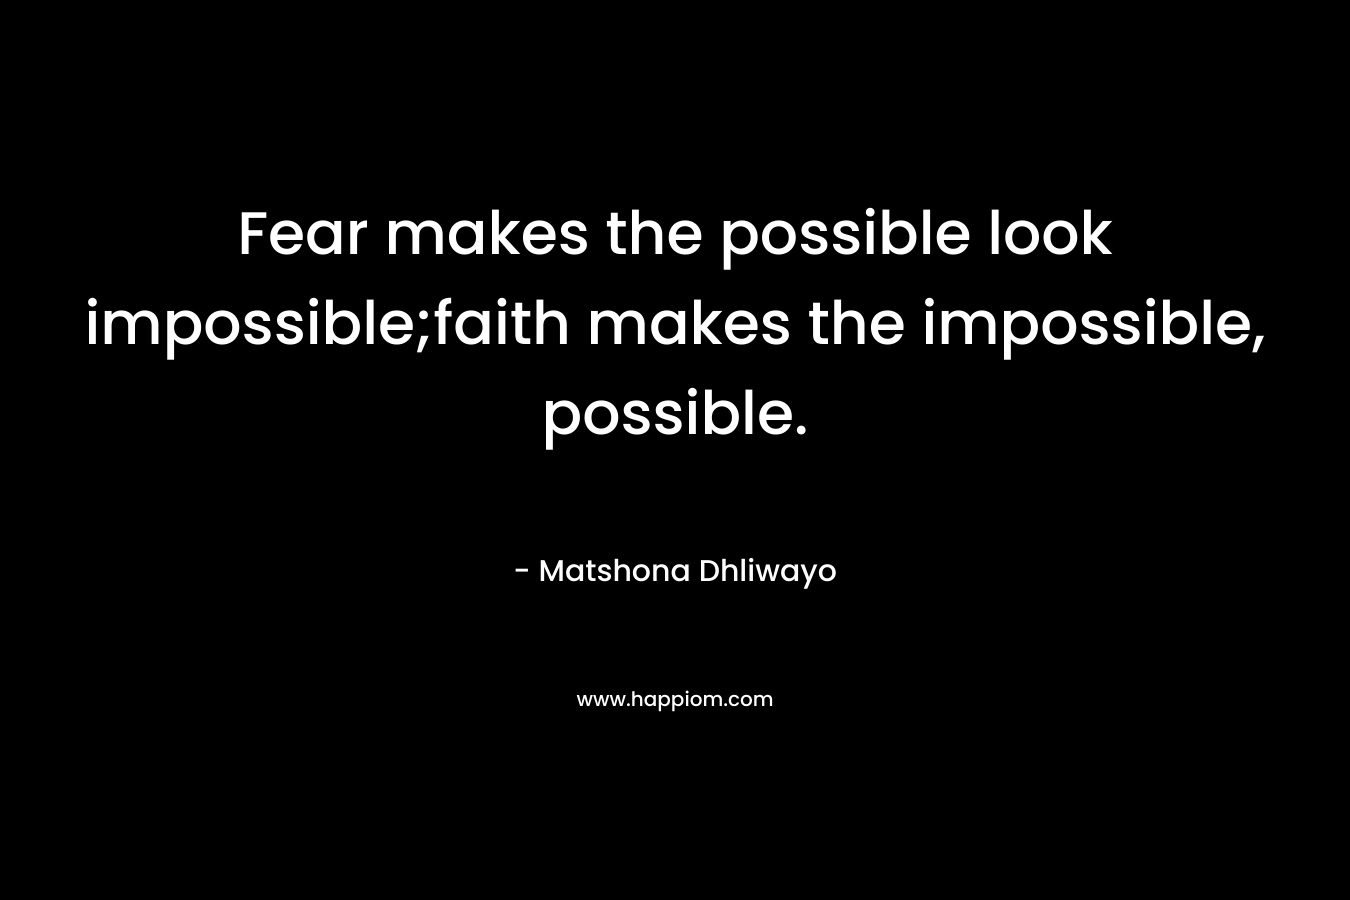 Fear makes the possible look impossible;faith makes the impossible, possible.